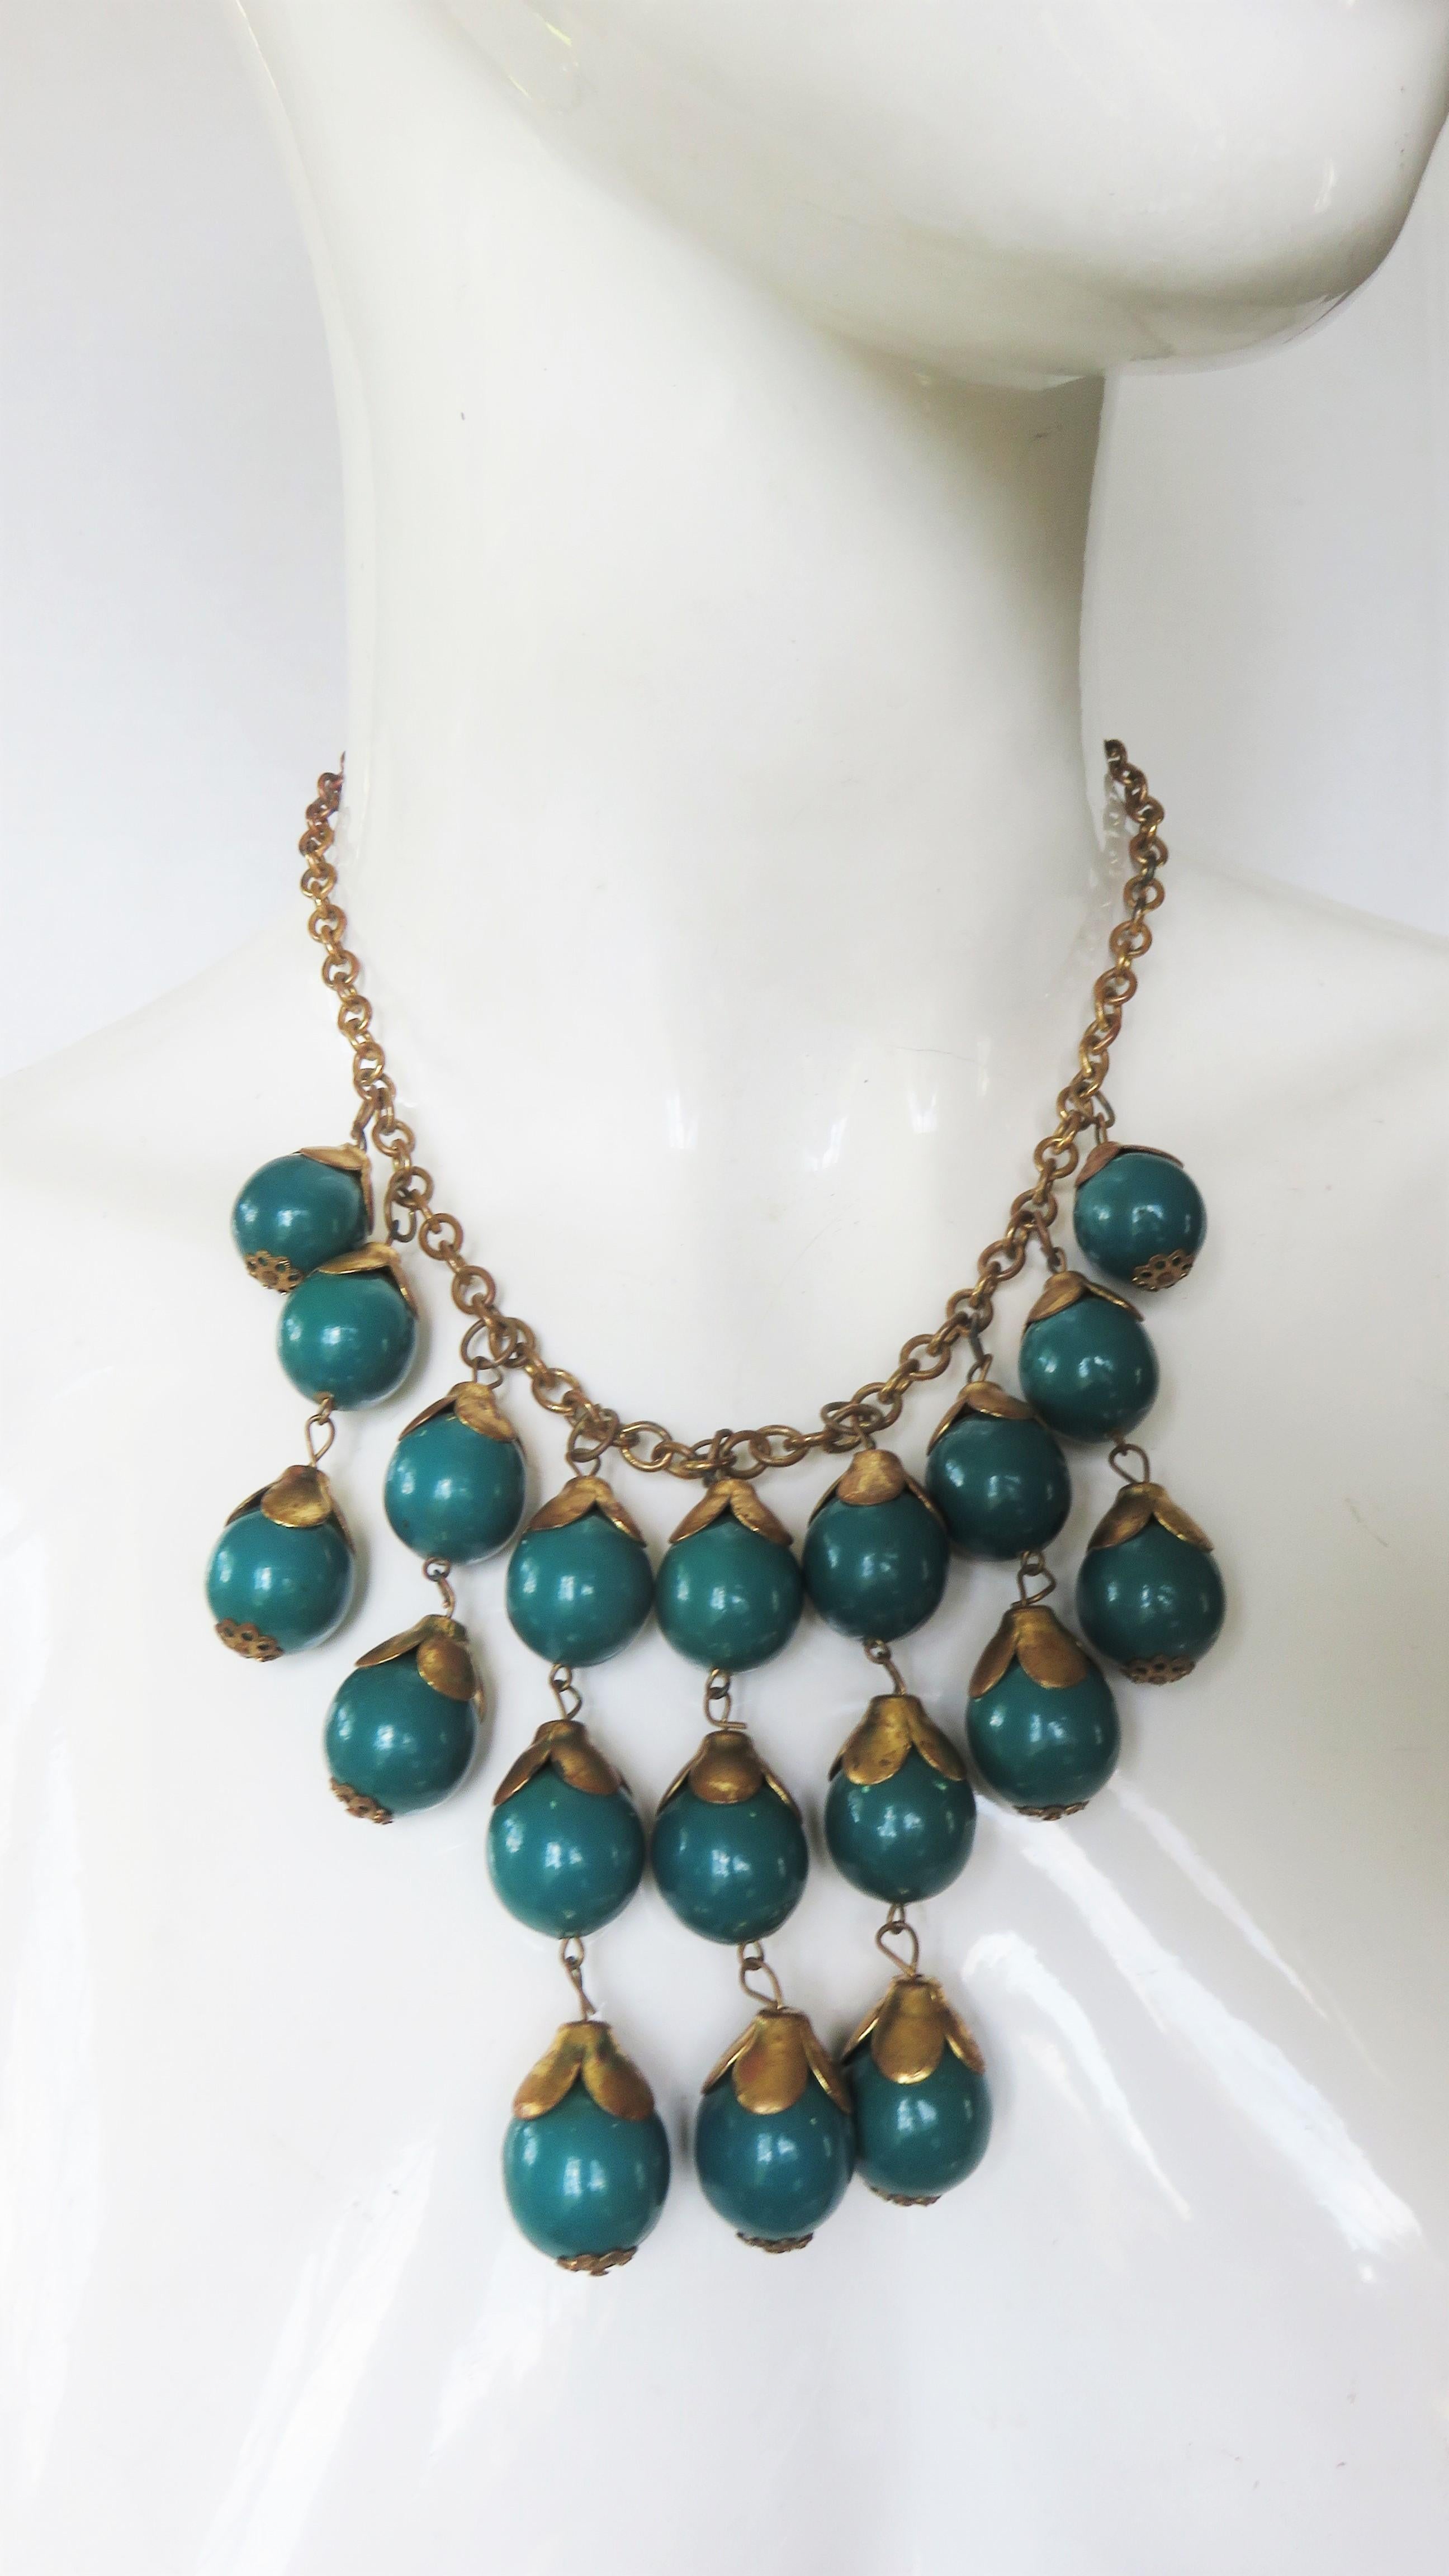 Brass and Celluloid Ball Drop 1940s Necklace In Good Condition For Sale In Water Mill, NY